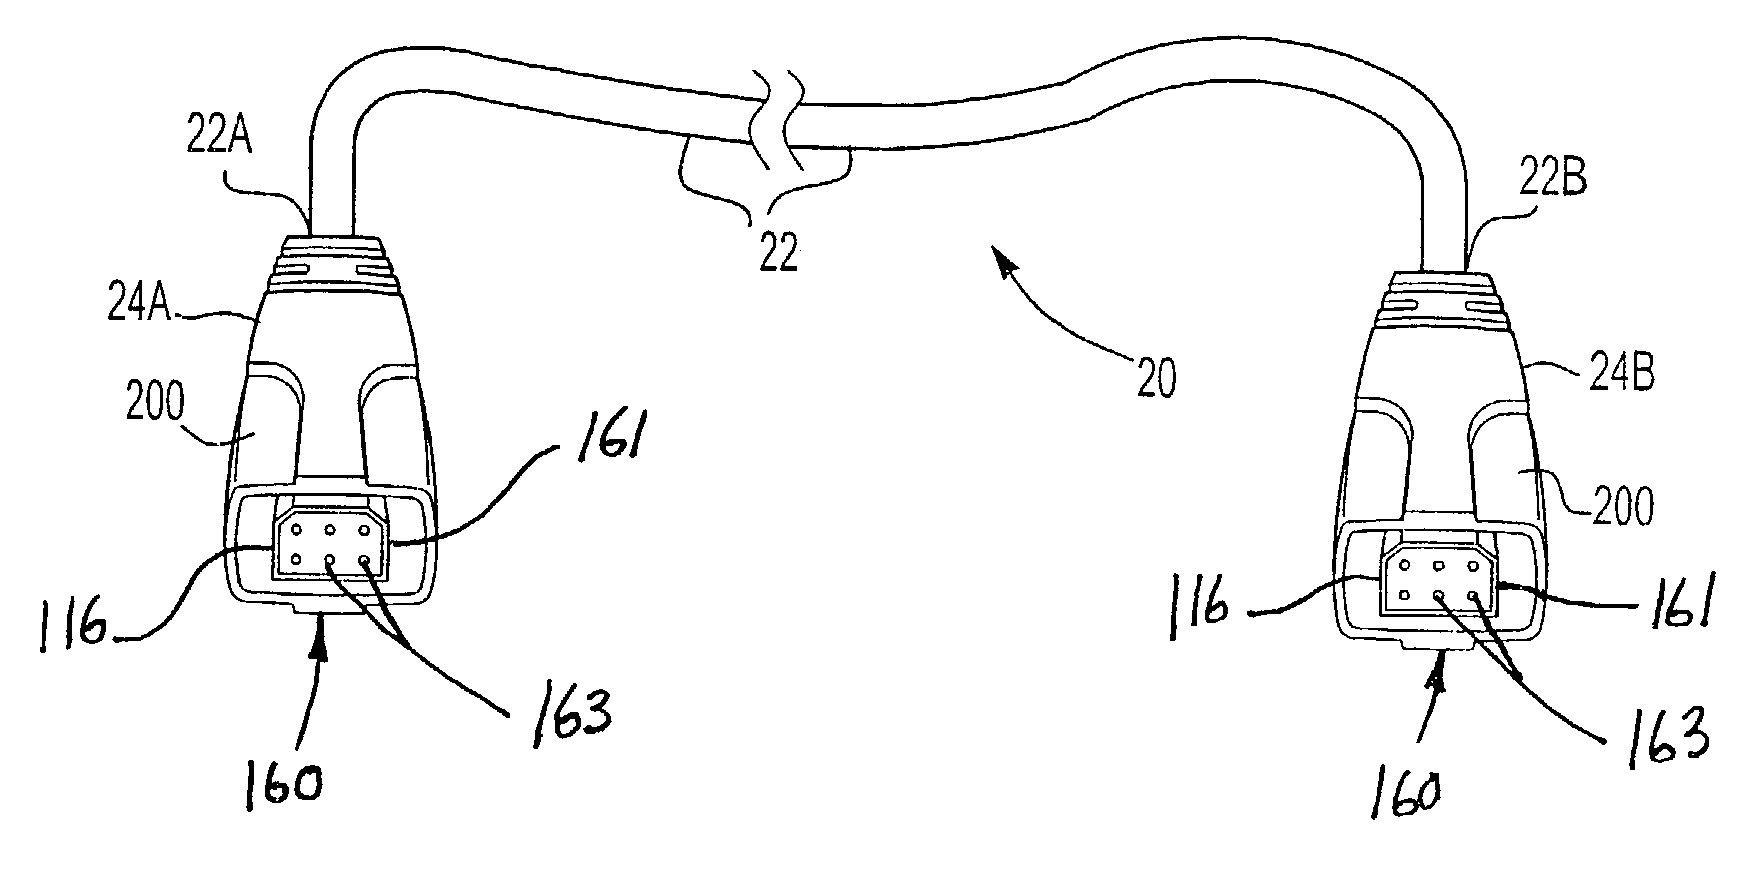 Universal computer cable with quick connectors and interchangeable ends, and system and method utilizing the same